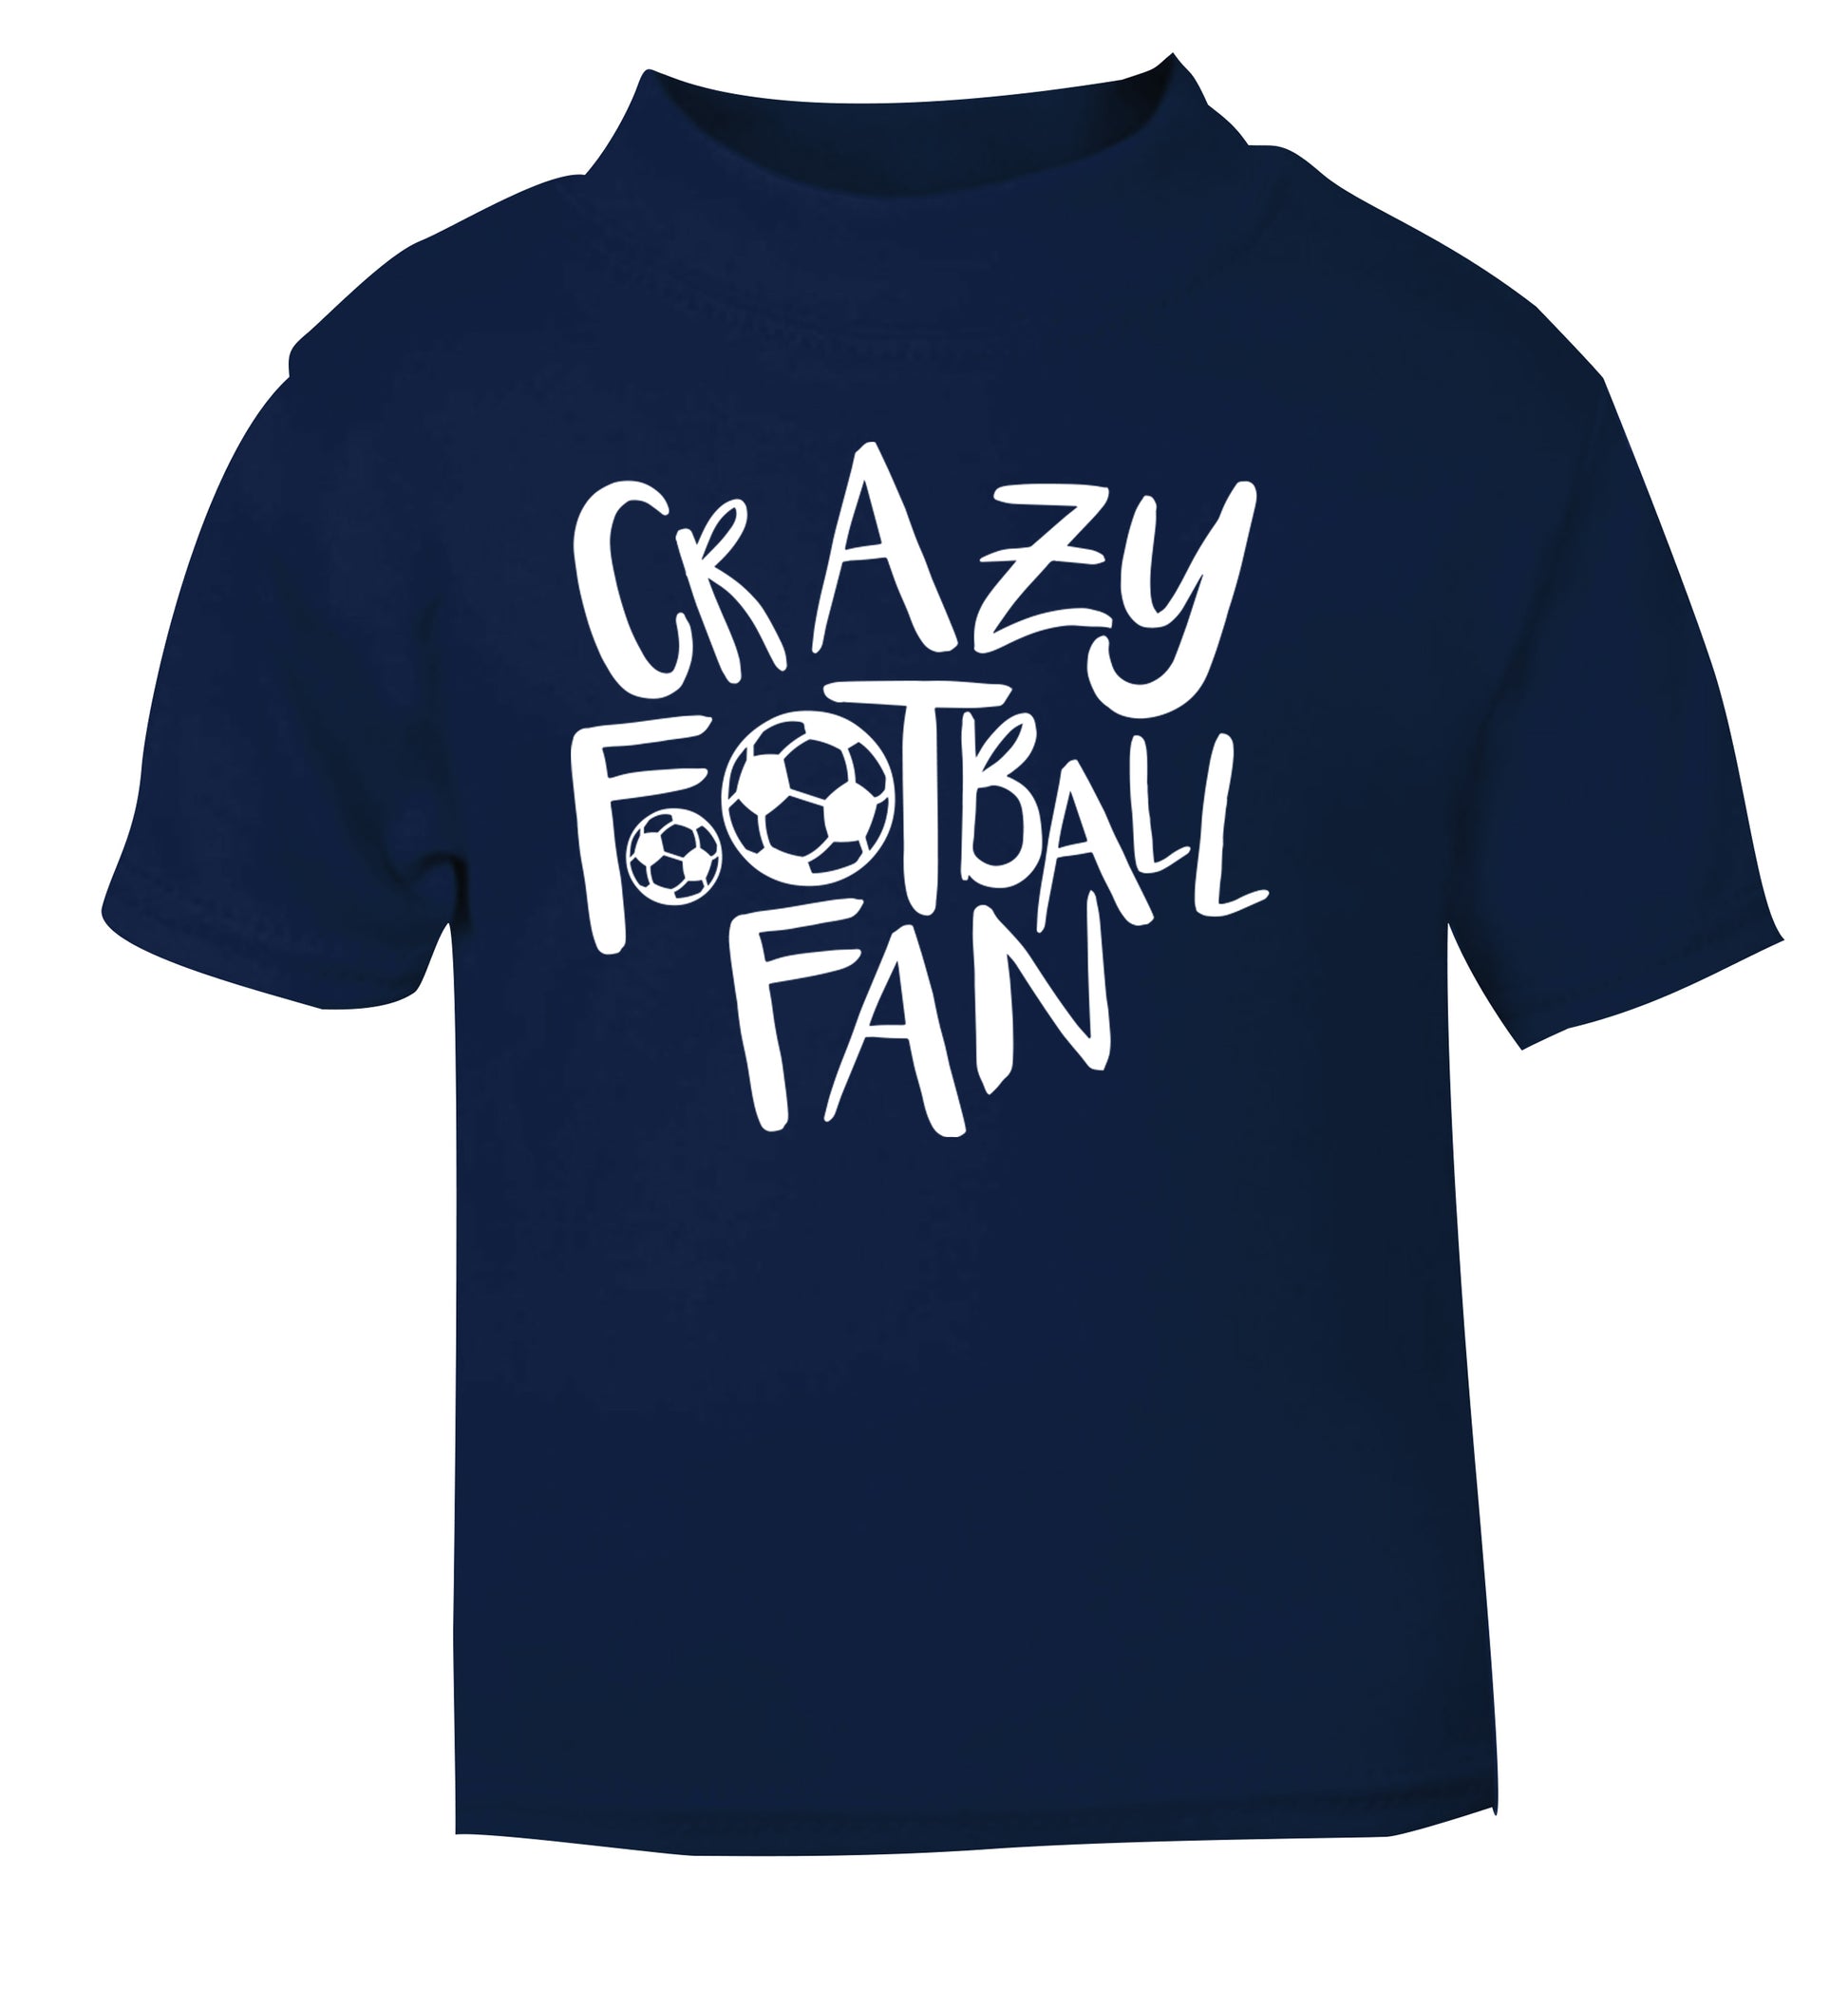 Crazy football fan navy Baby Toddler Tshirt 2 Years